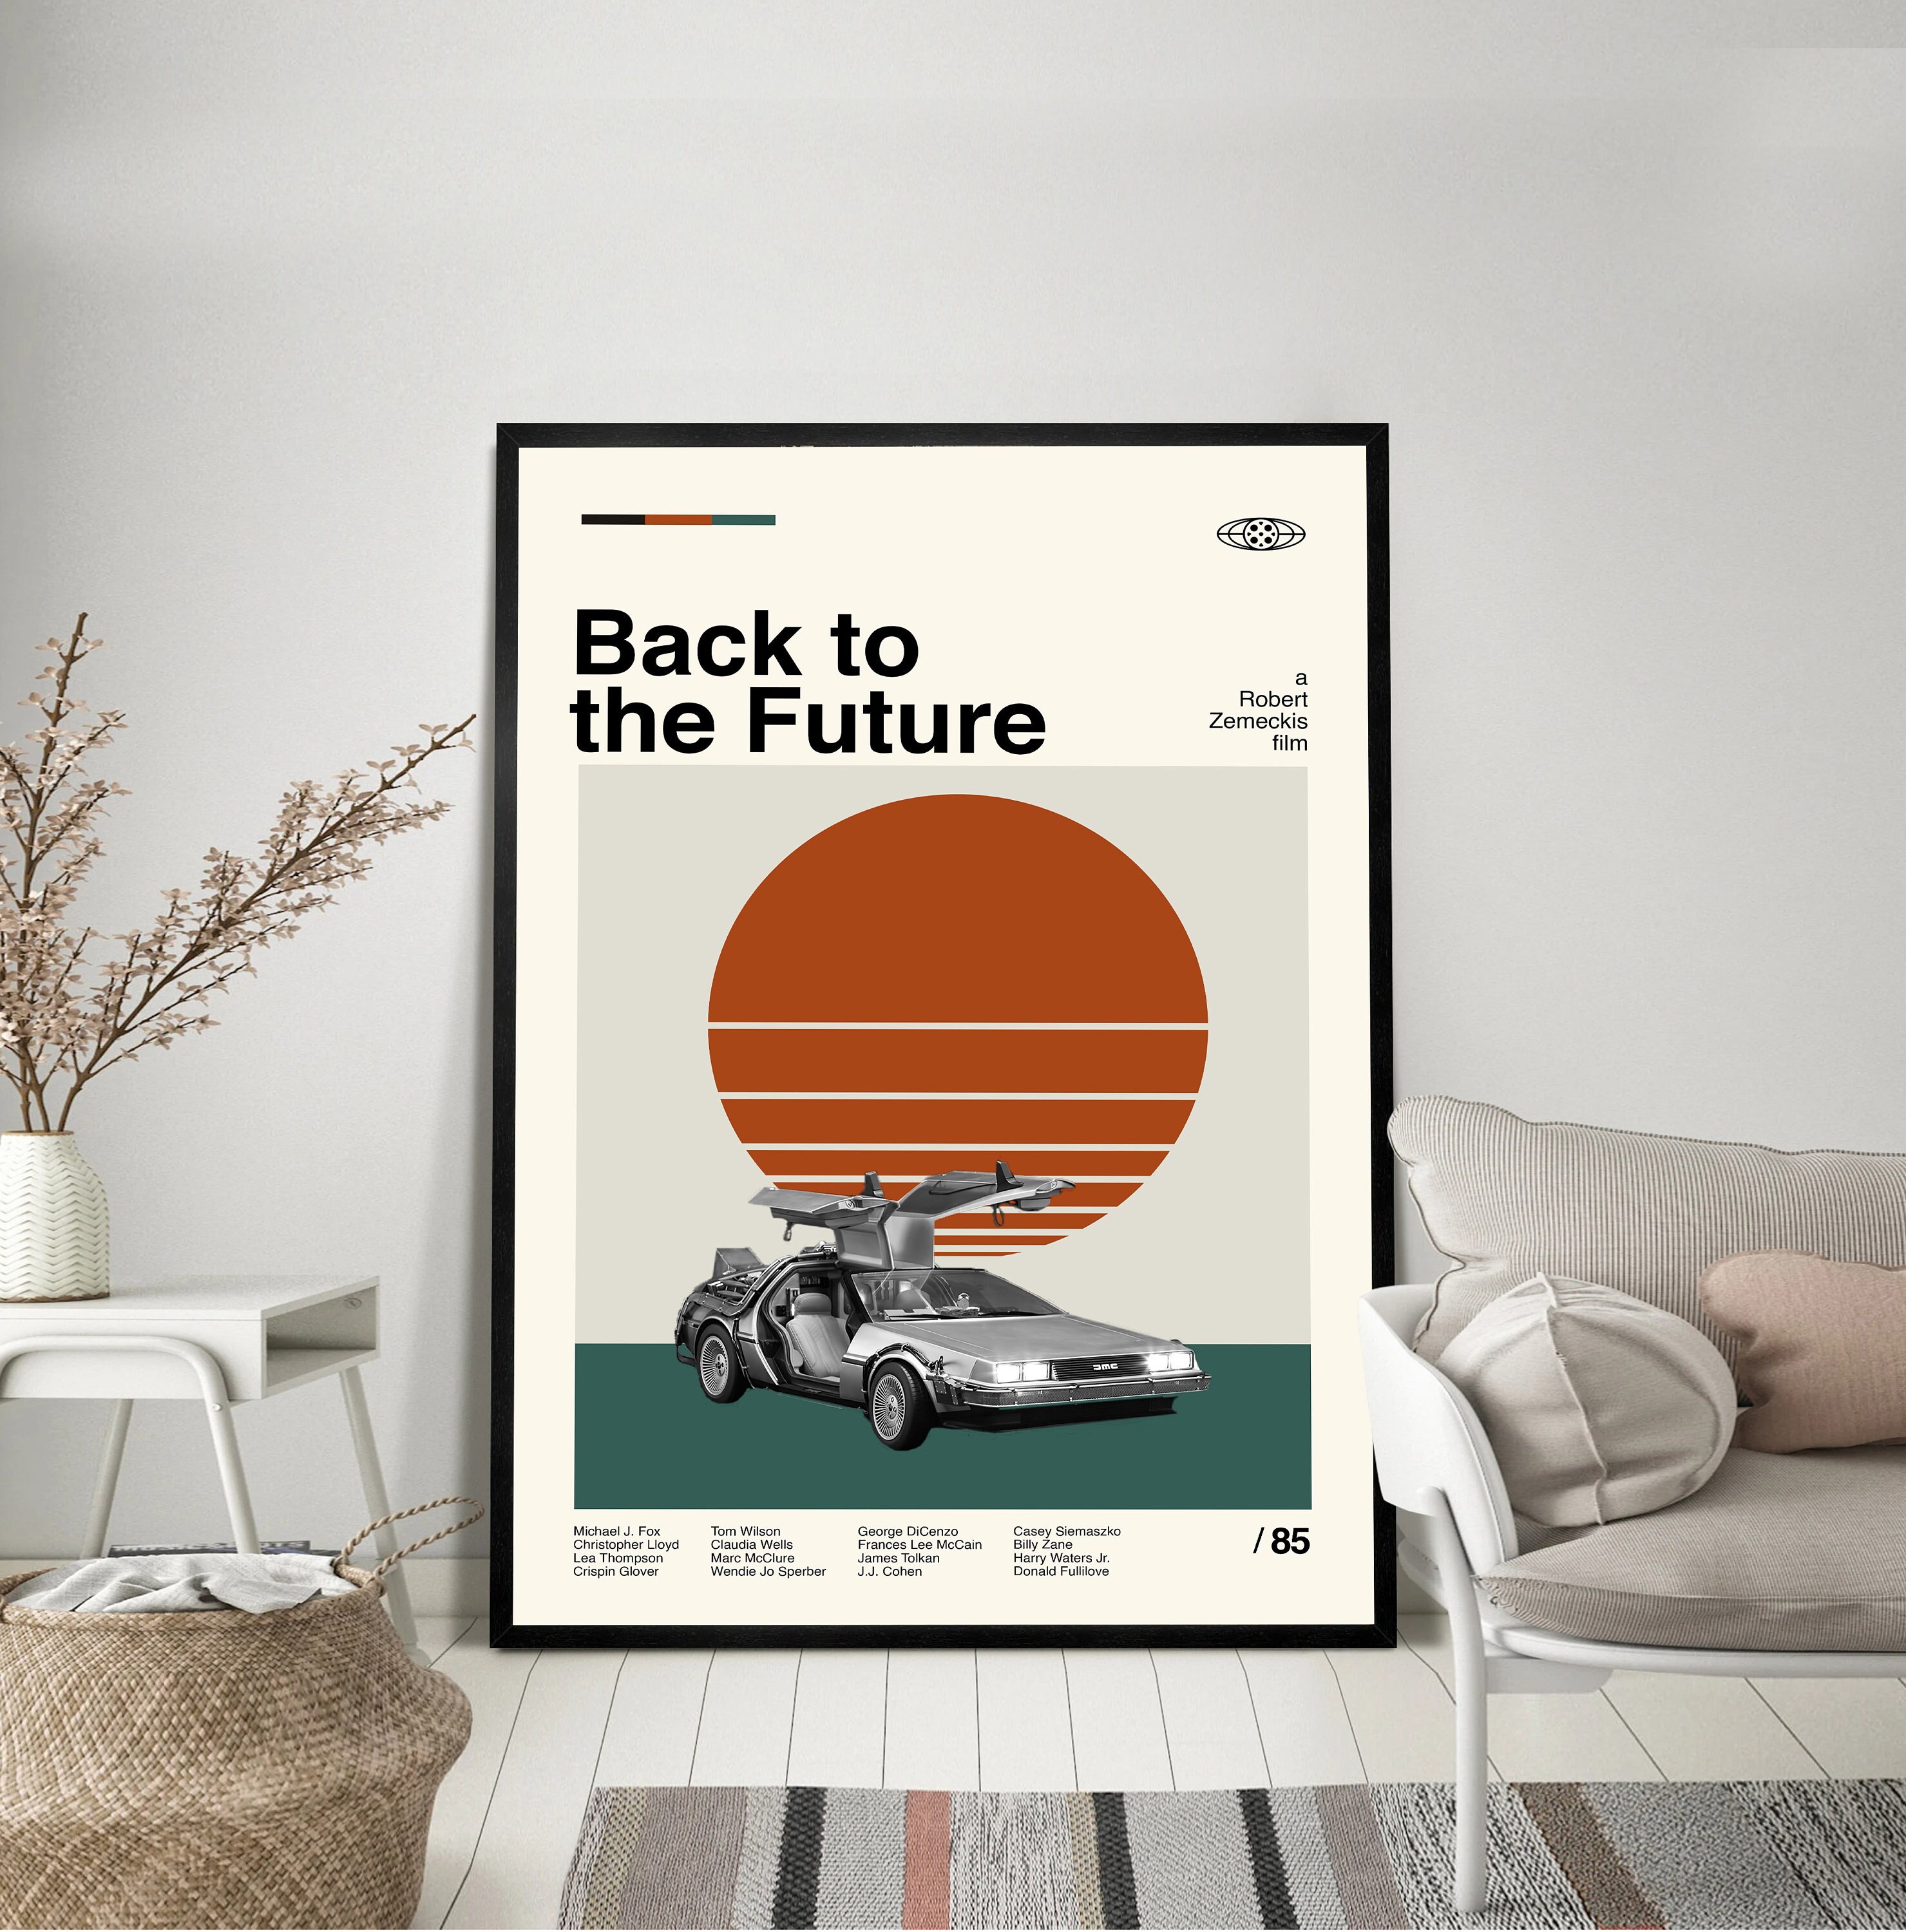 Discover Back to the Future - DELOREAN - Movie poster - Retro Modern Poster - Vintage Movie Poster -  No Frame